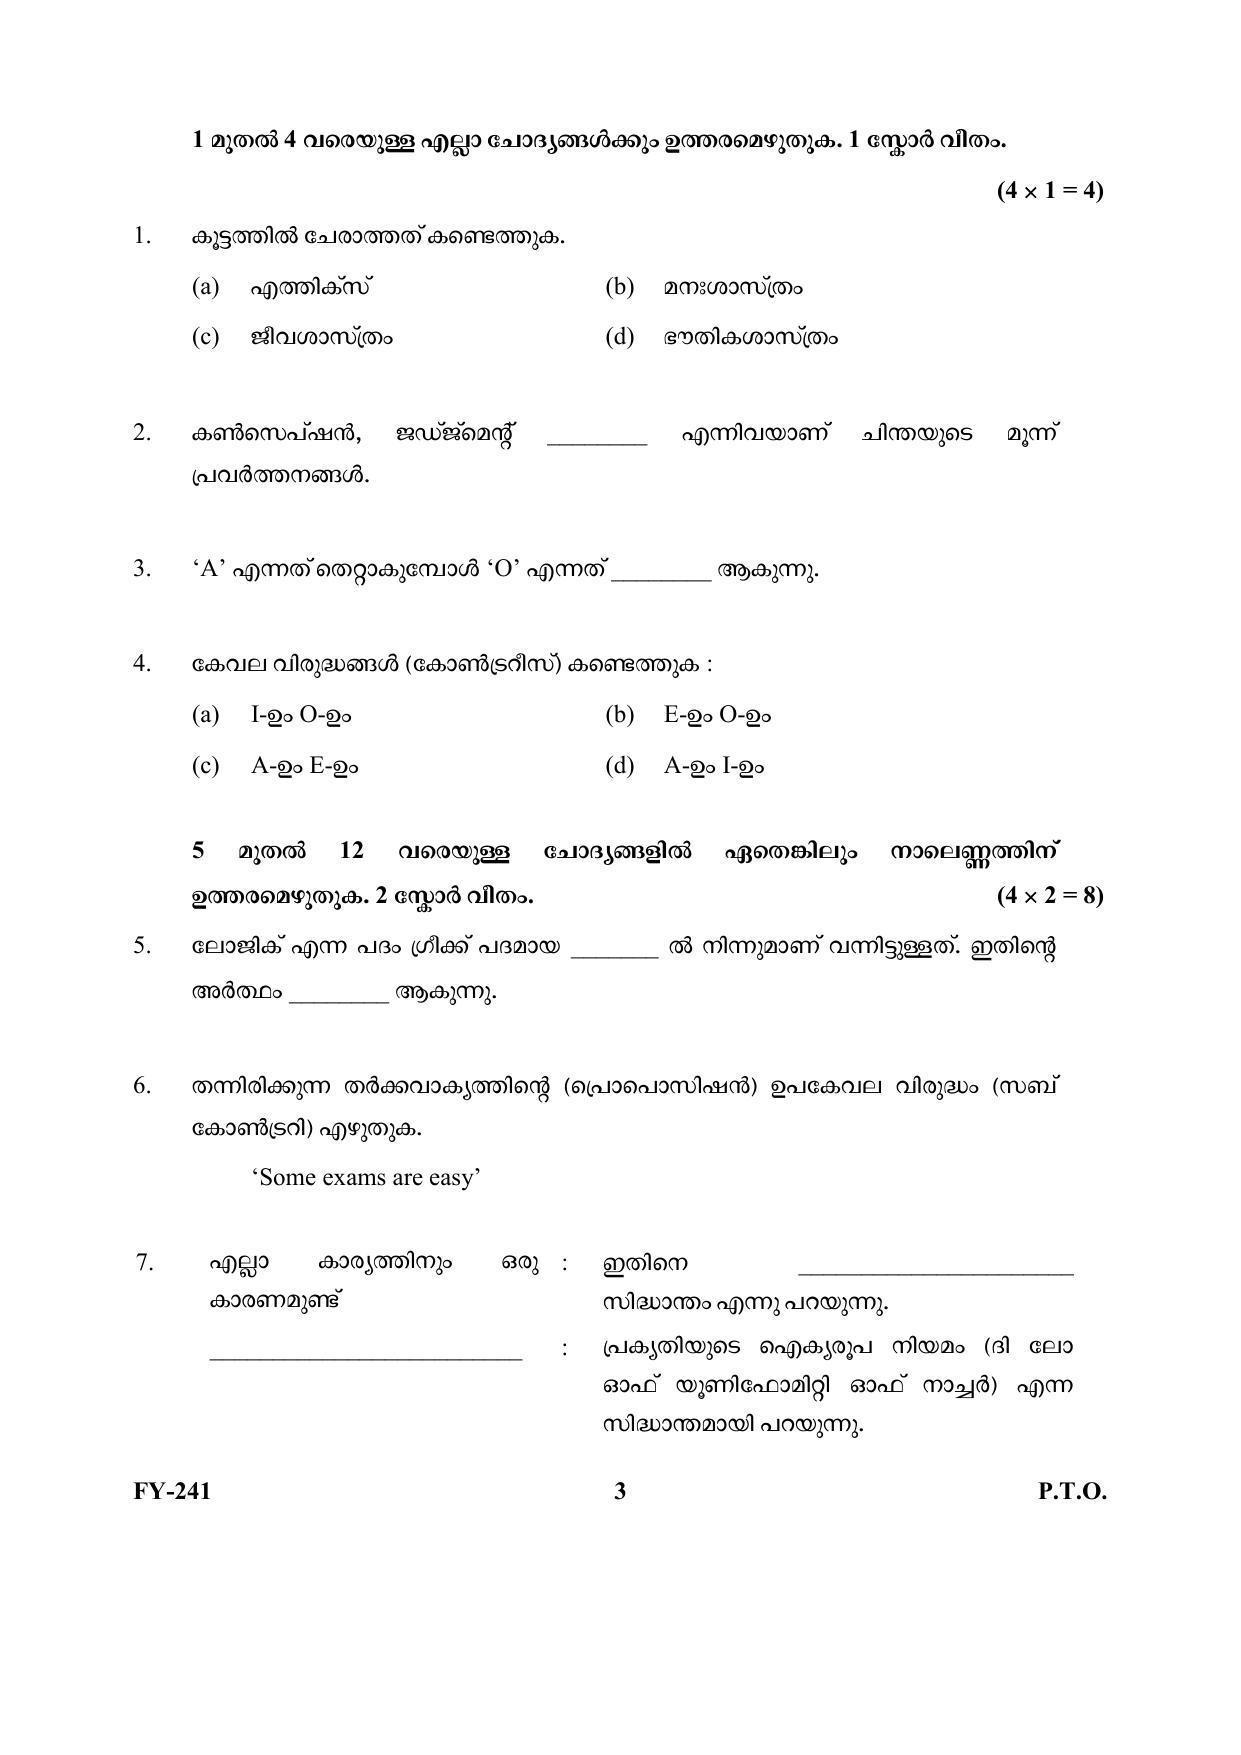 Kerala Plus One (Class 11th) Philosaphy Question Paper 2021 - Page 3